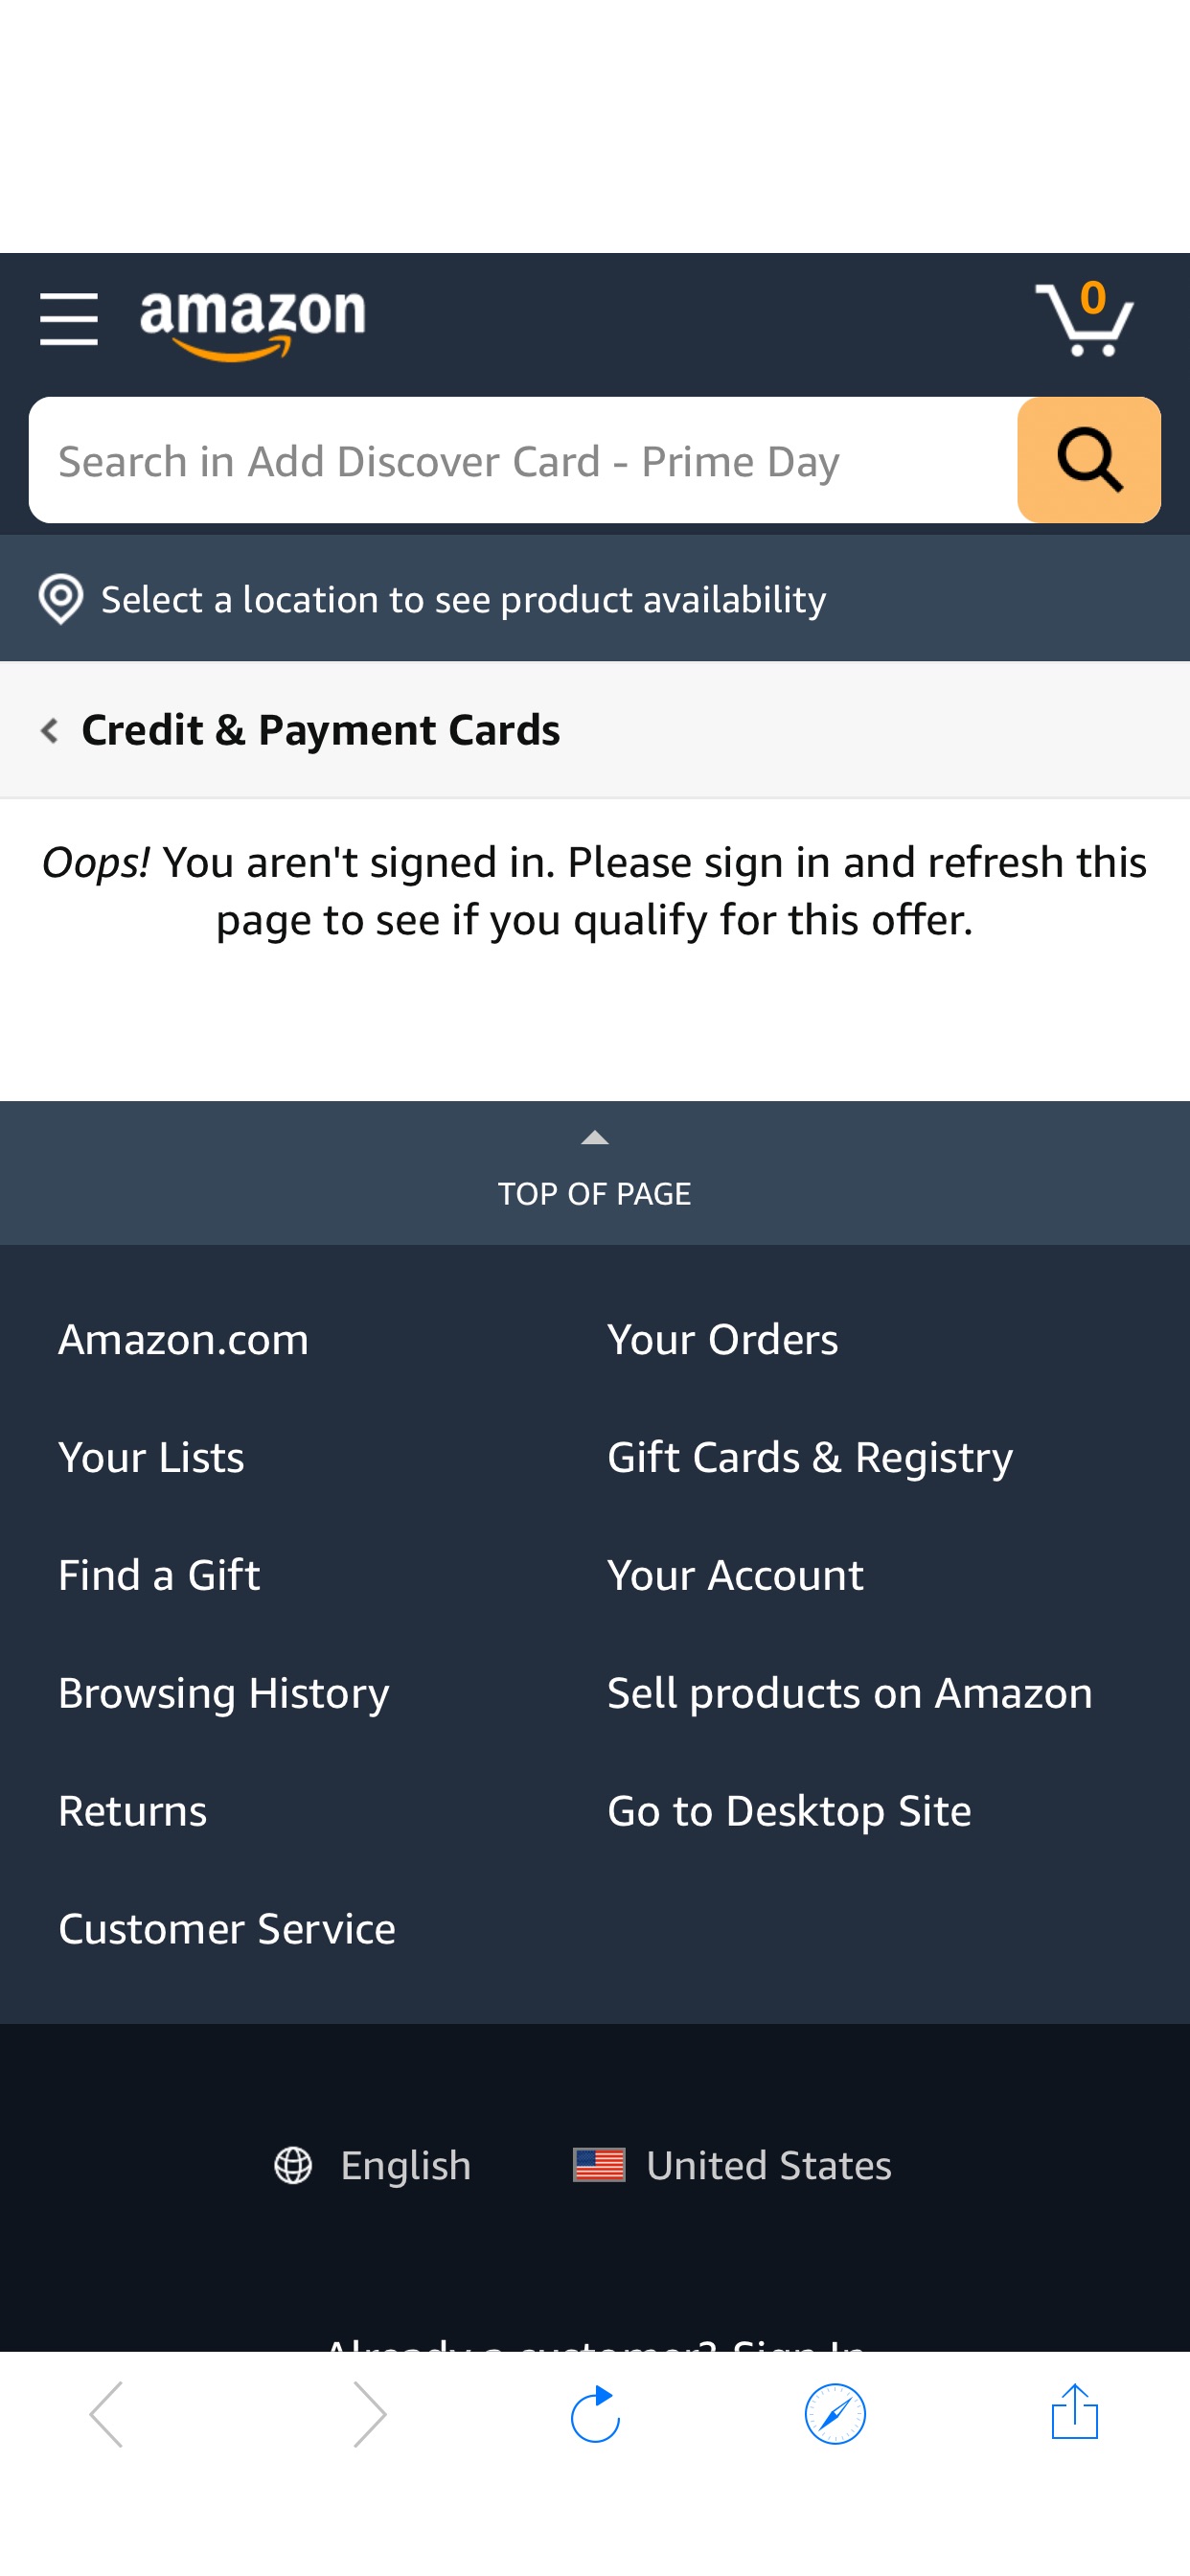 Amazon.com: Add Discover Card - Prime Day: Credit & Payment Cards用discover绑定卡付